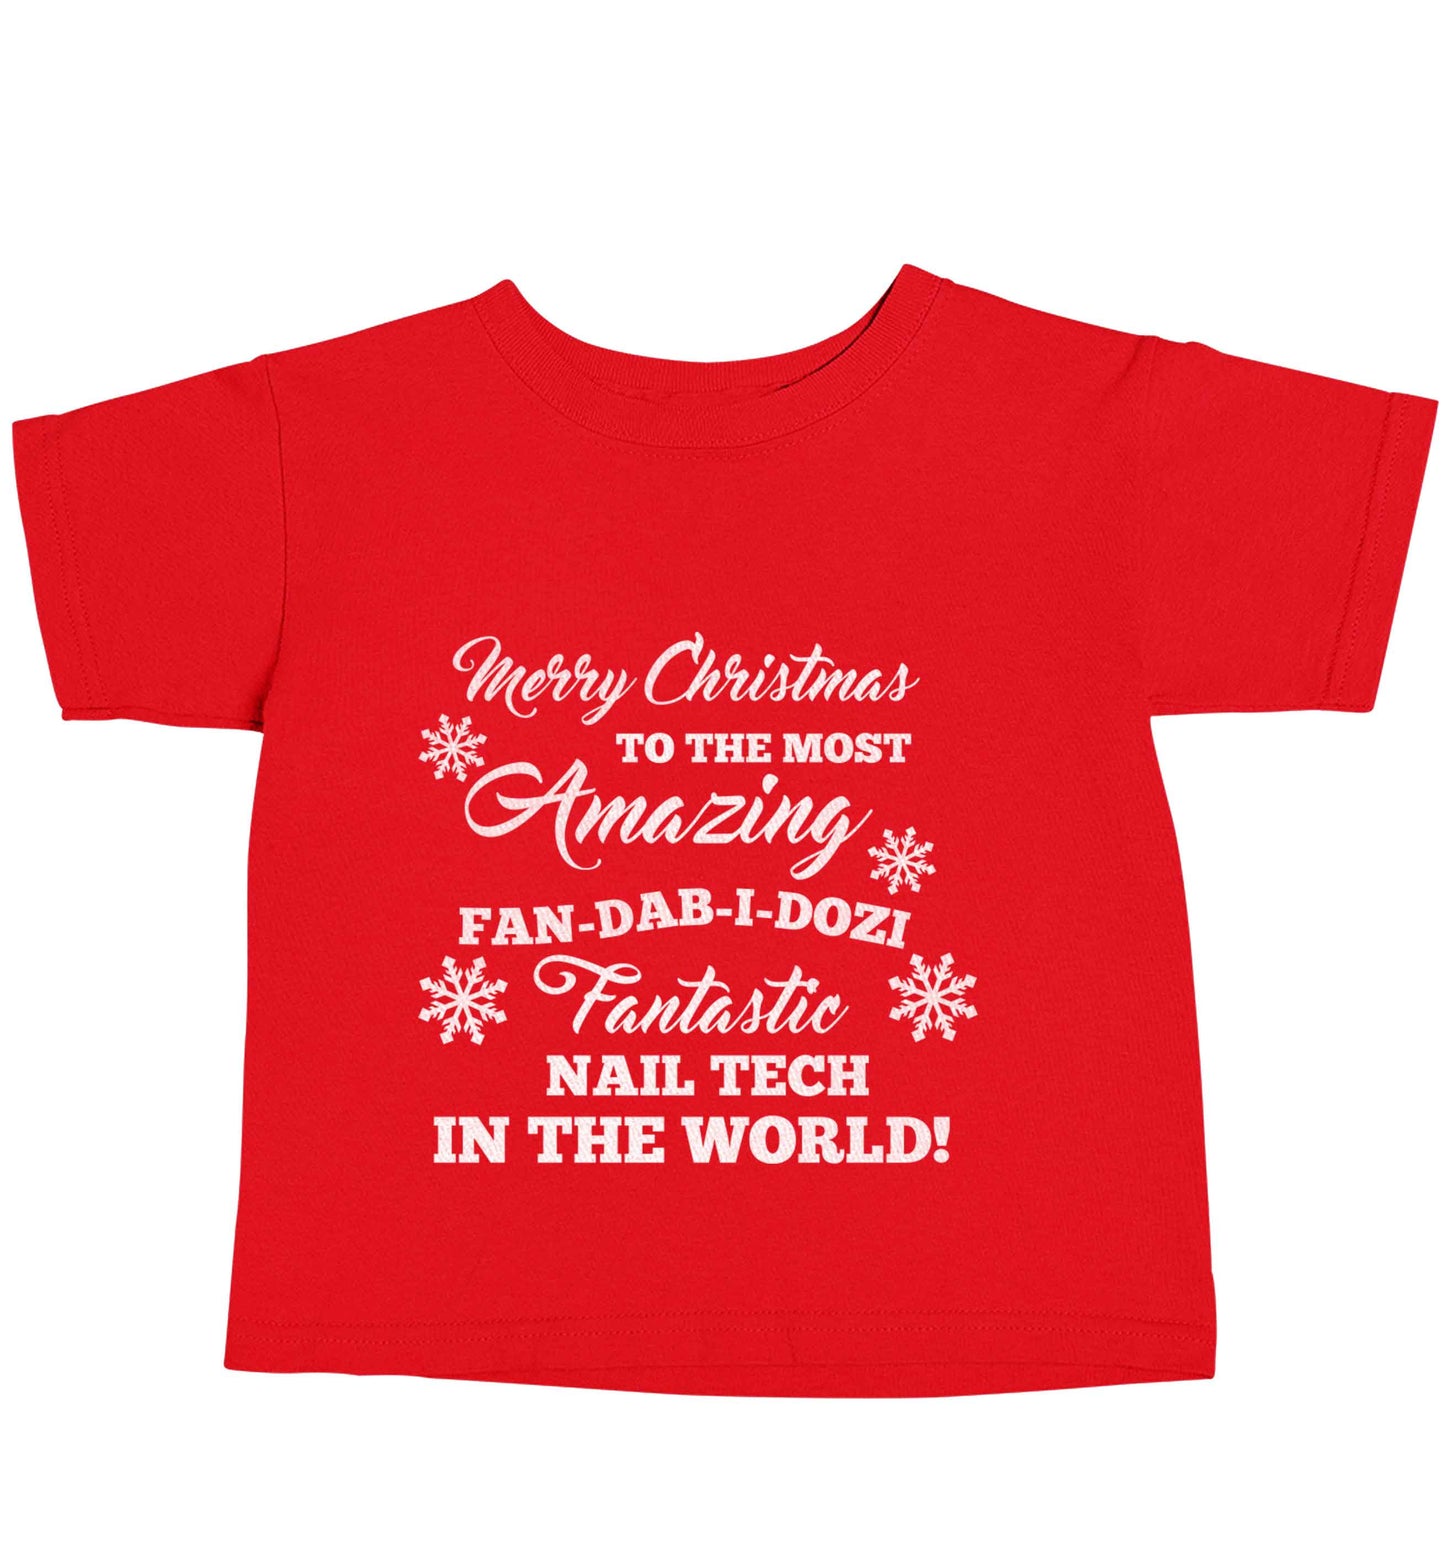 Merry Christmas to the most amazing fan-dab-i-dozi fantasic nail technician in the world red baby toddler Tshirt 2 Years